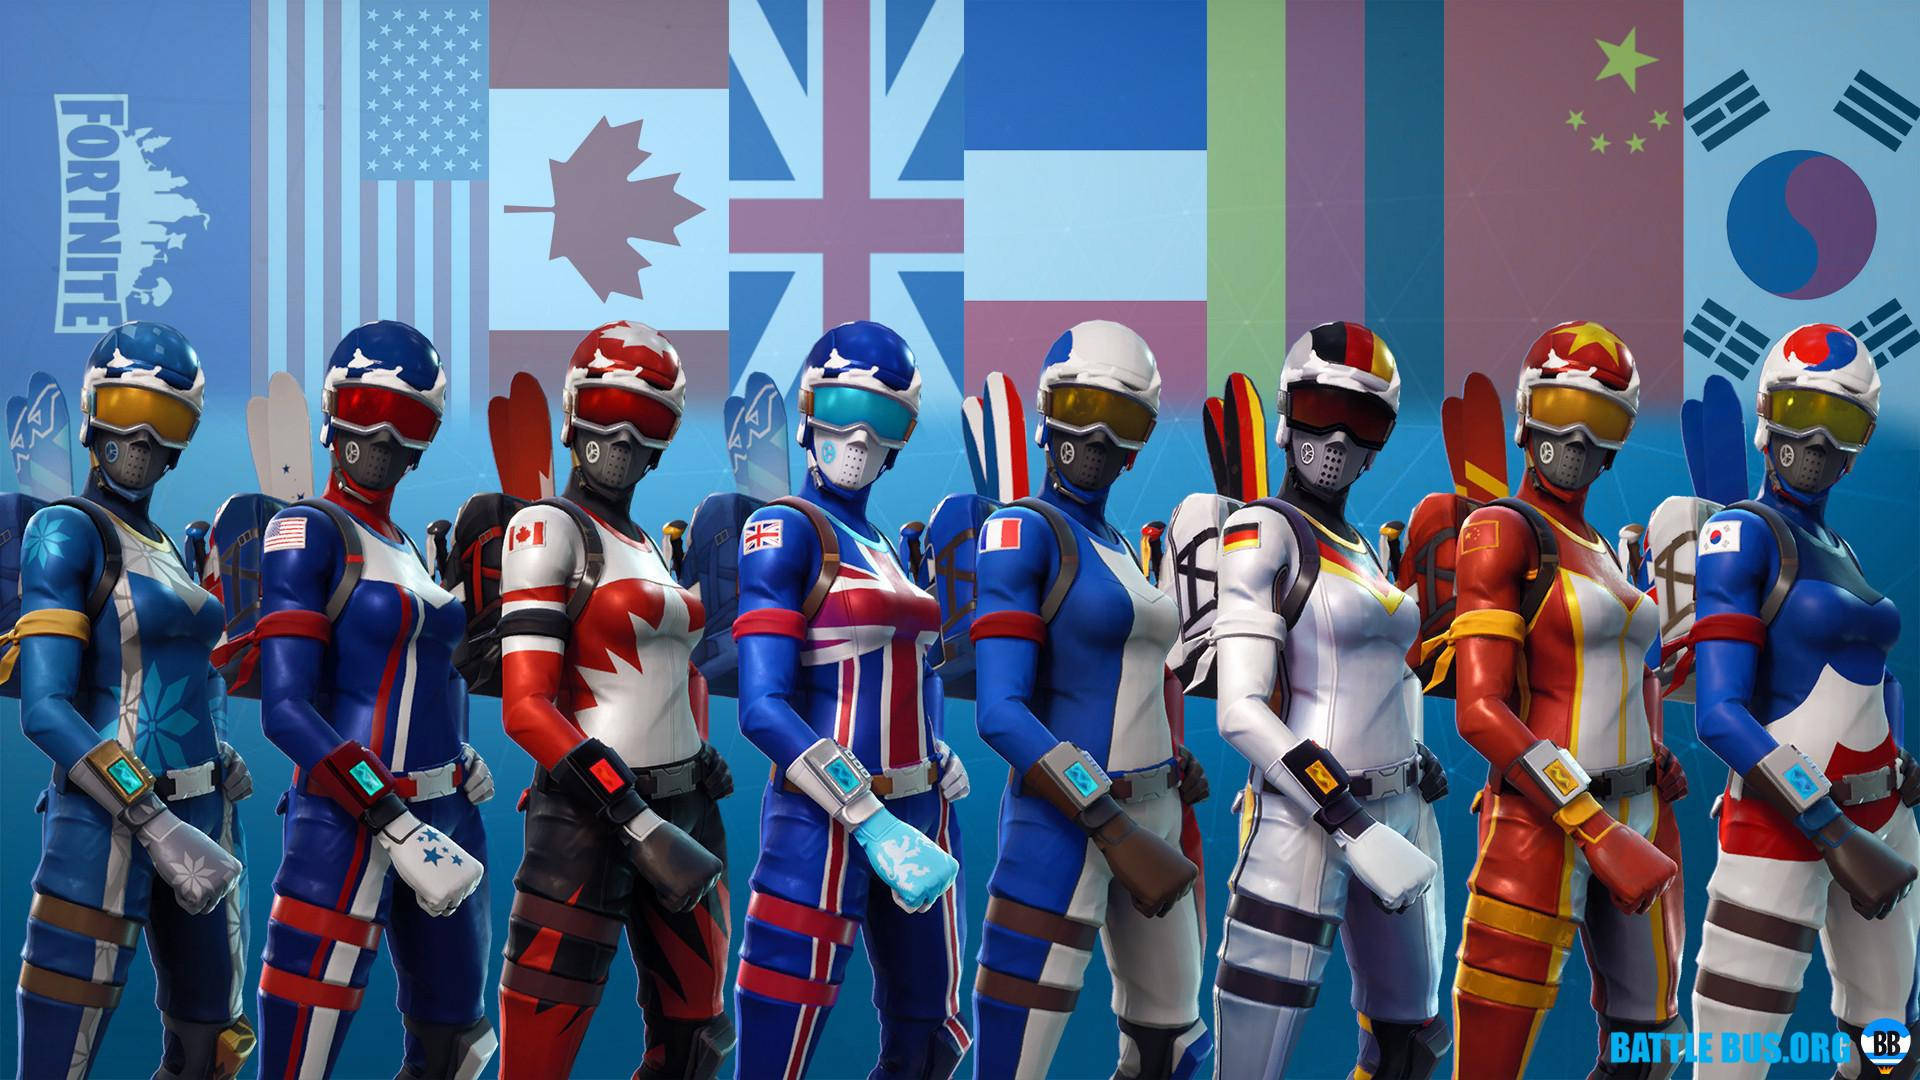 A Group Of People In Uniforms Standing In Front Of Flags Wallpaper